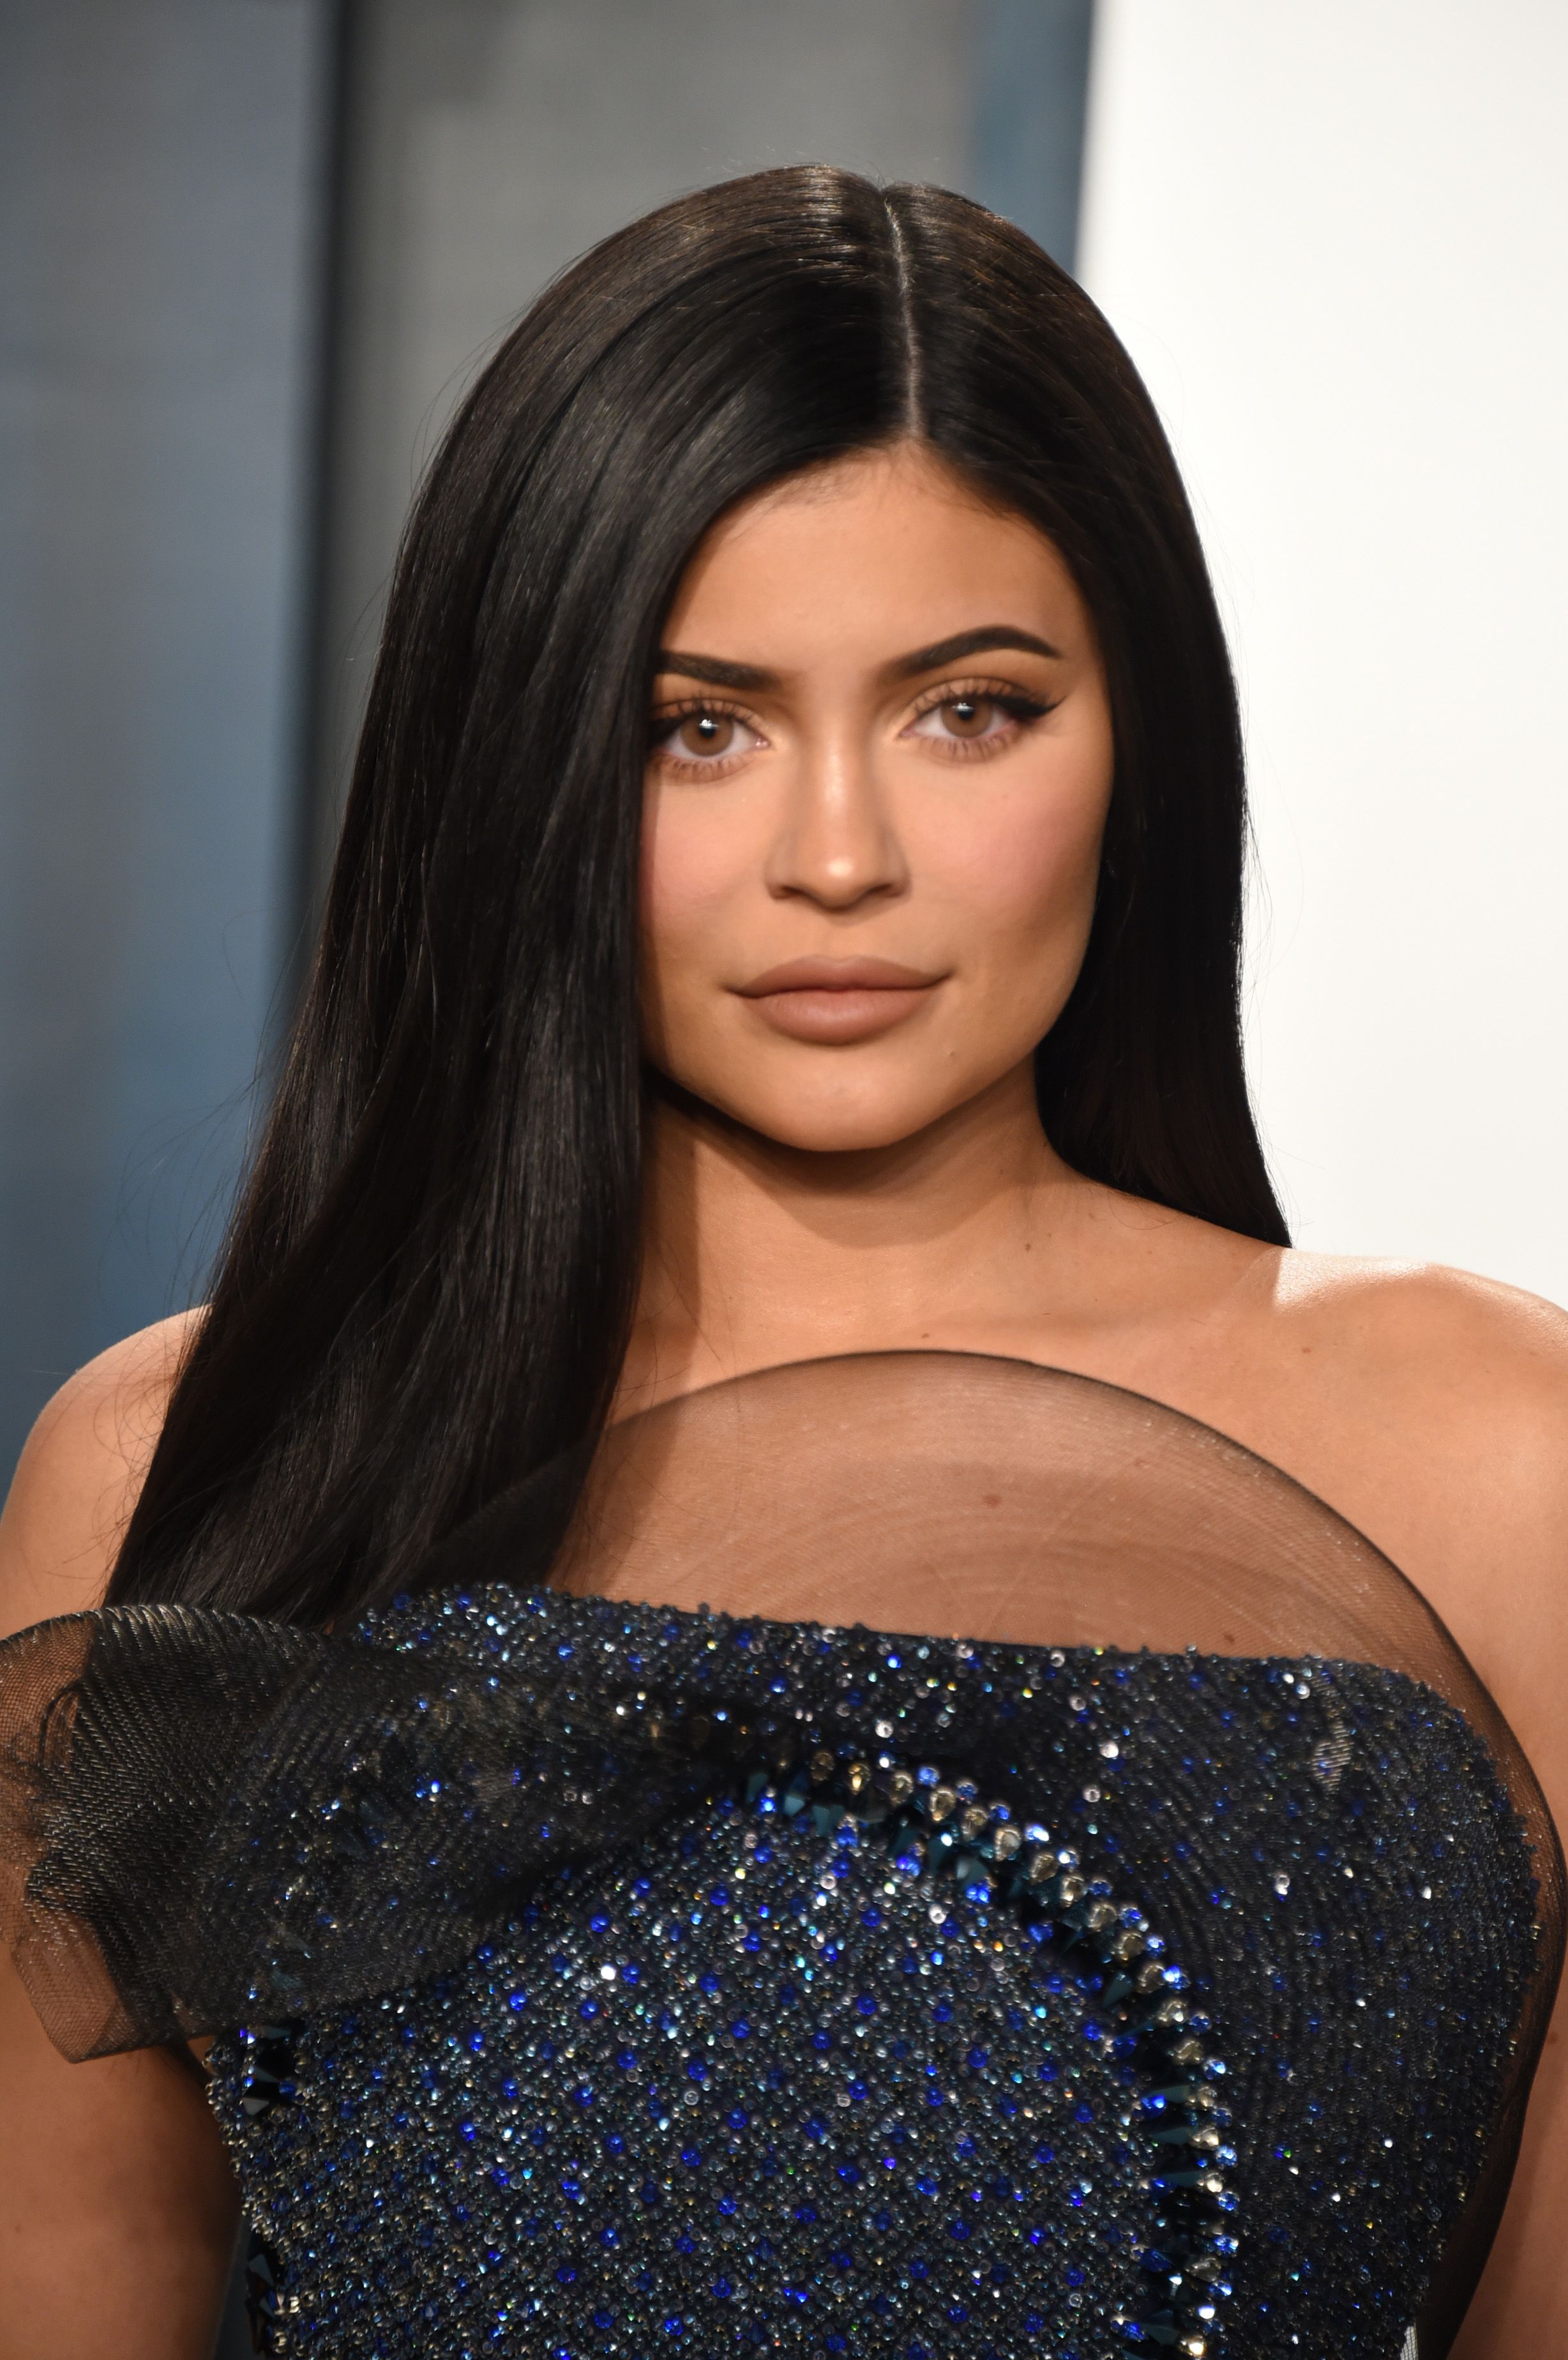 Prepare To Be Floored By Kylie Jenner S Beauty Evolution From 2007 To Now The official kylie cosmetics by kylie jenner facebook page. kylie jenner s beauty evolution